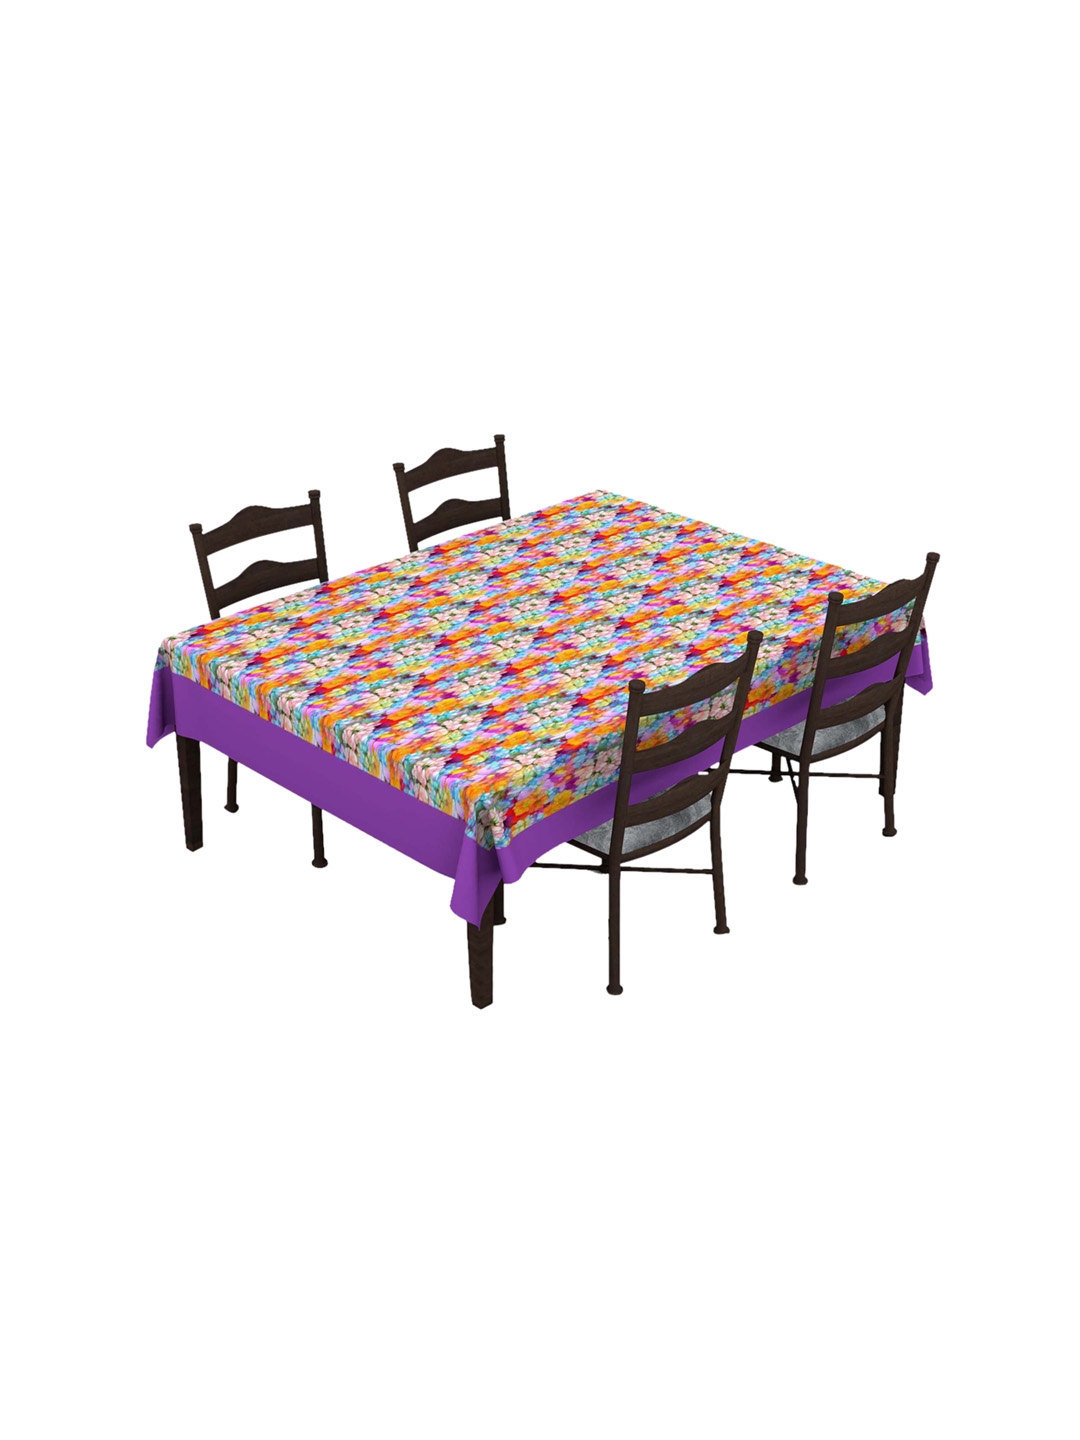 Lushomes Multicoloured Digital Printed 6 Seater Table Cover